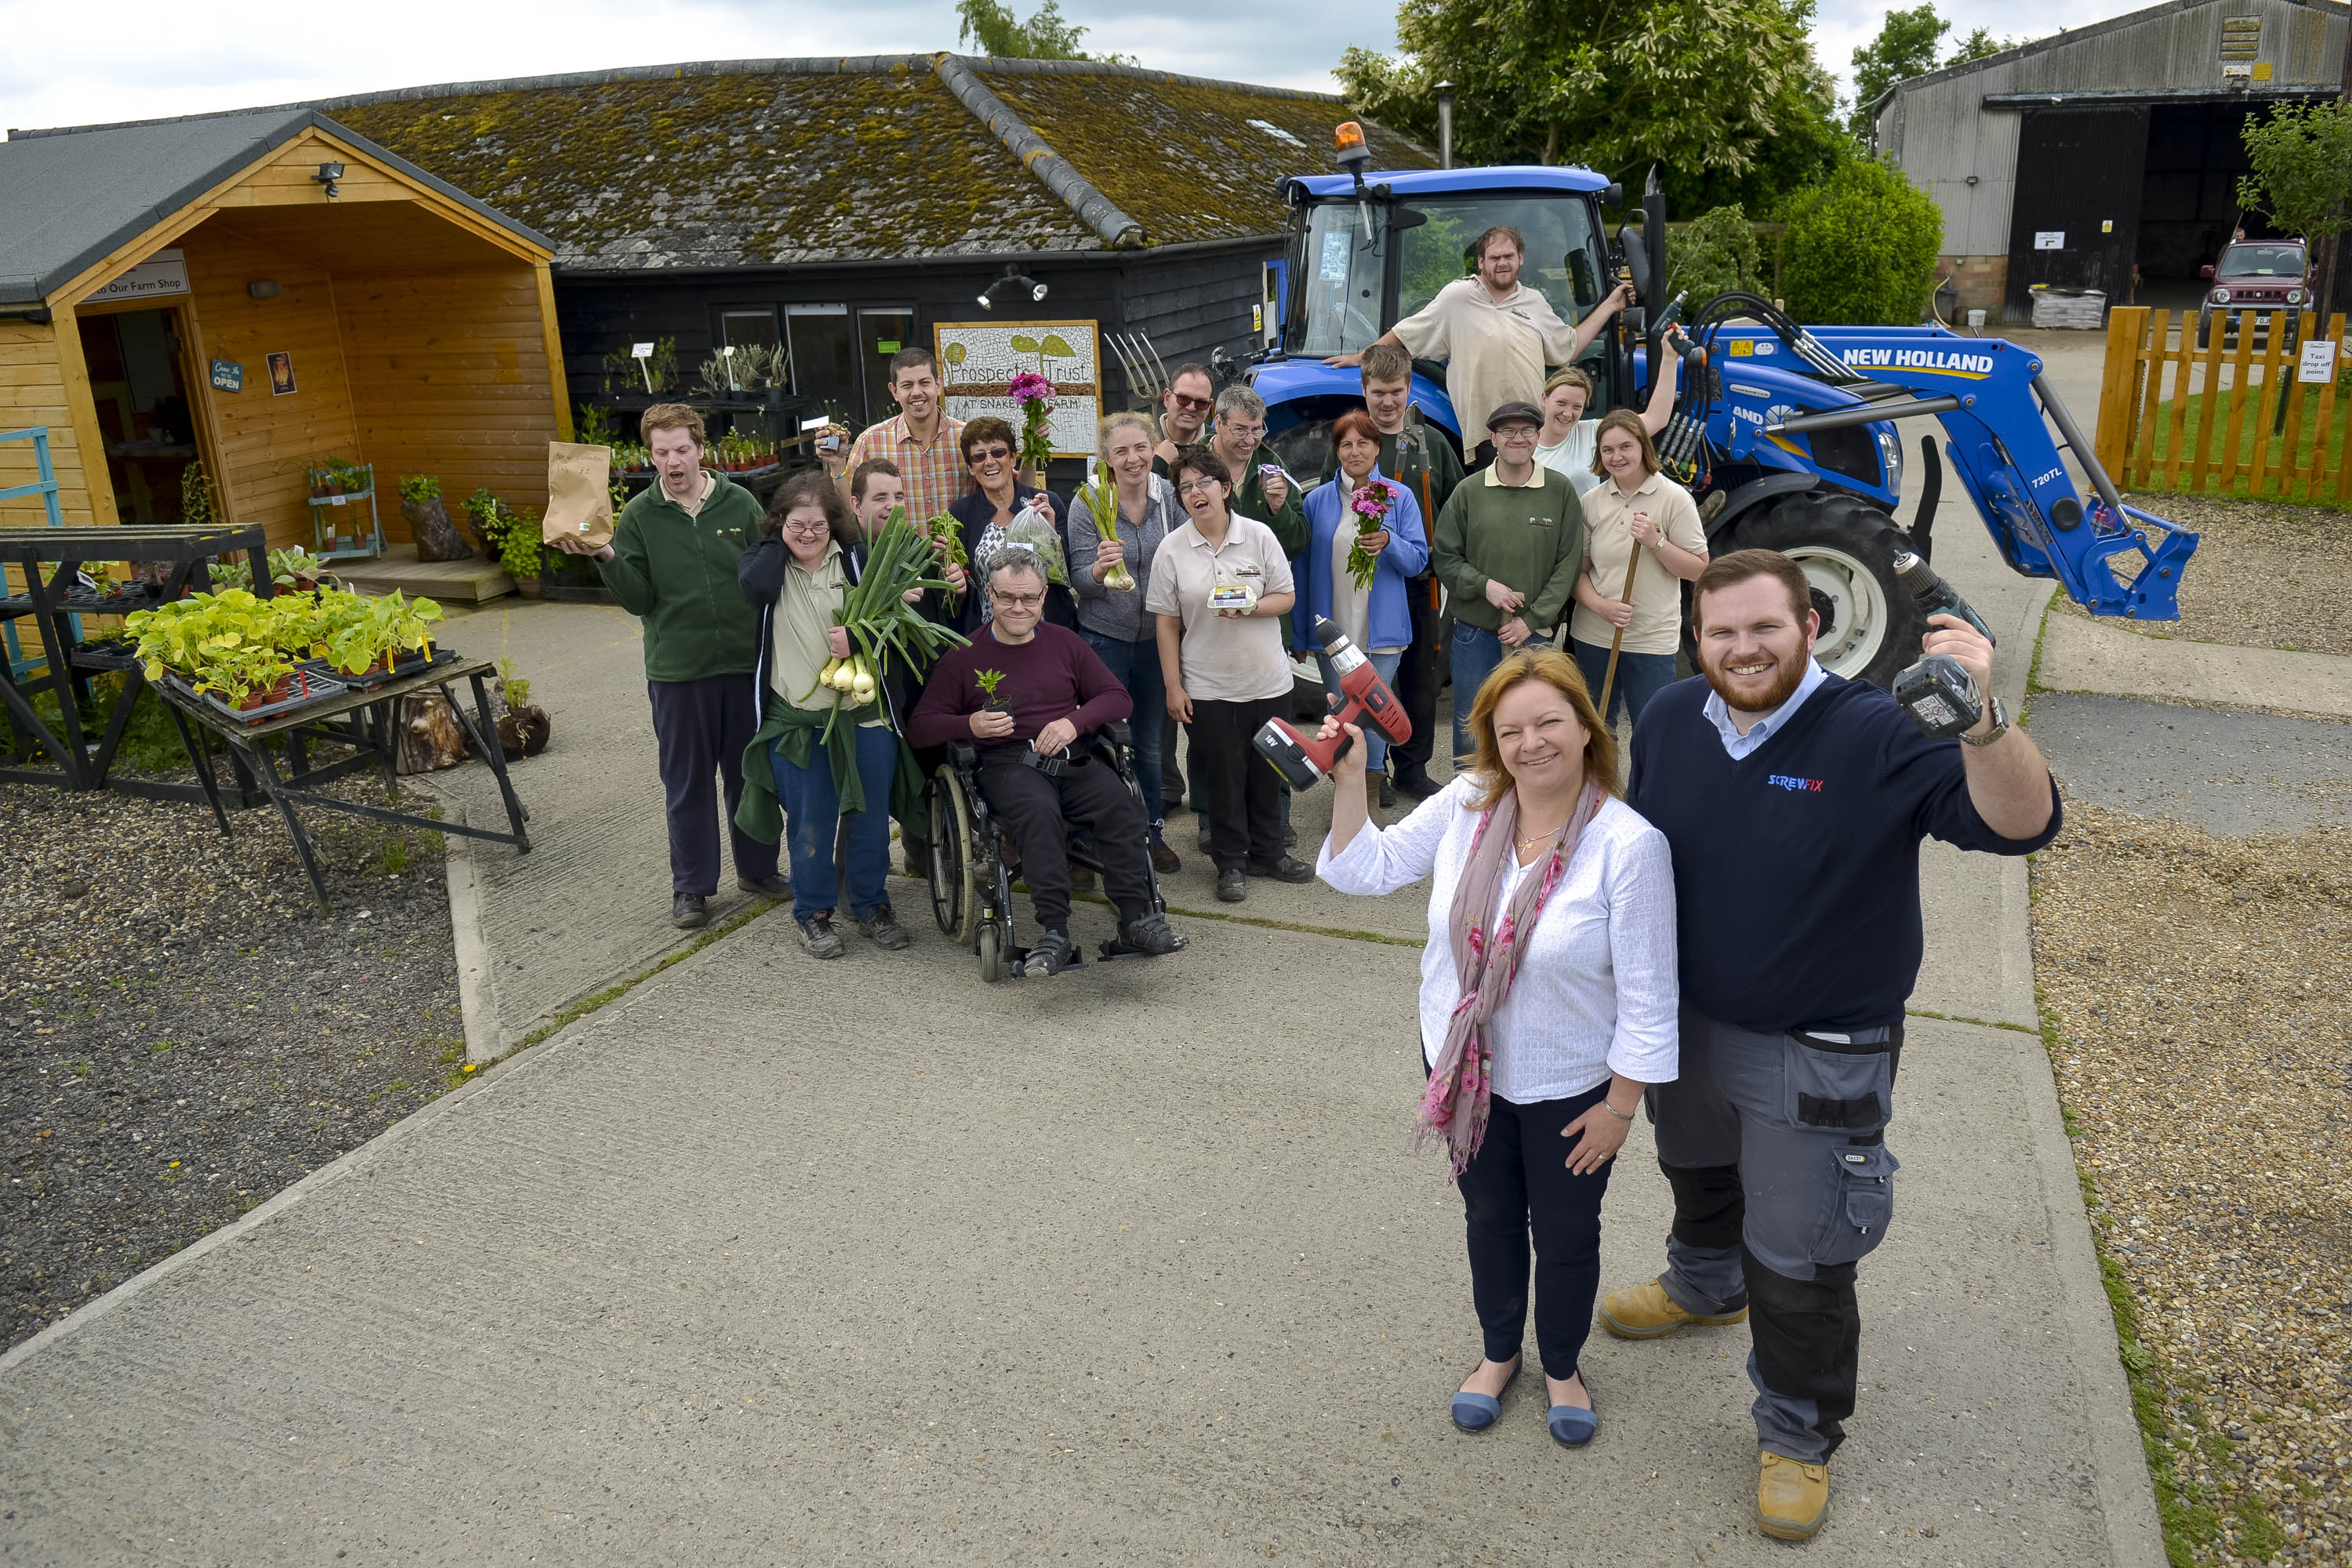 Cambridge based charity gets a helping hand from the Screwfix Foundation